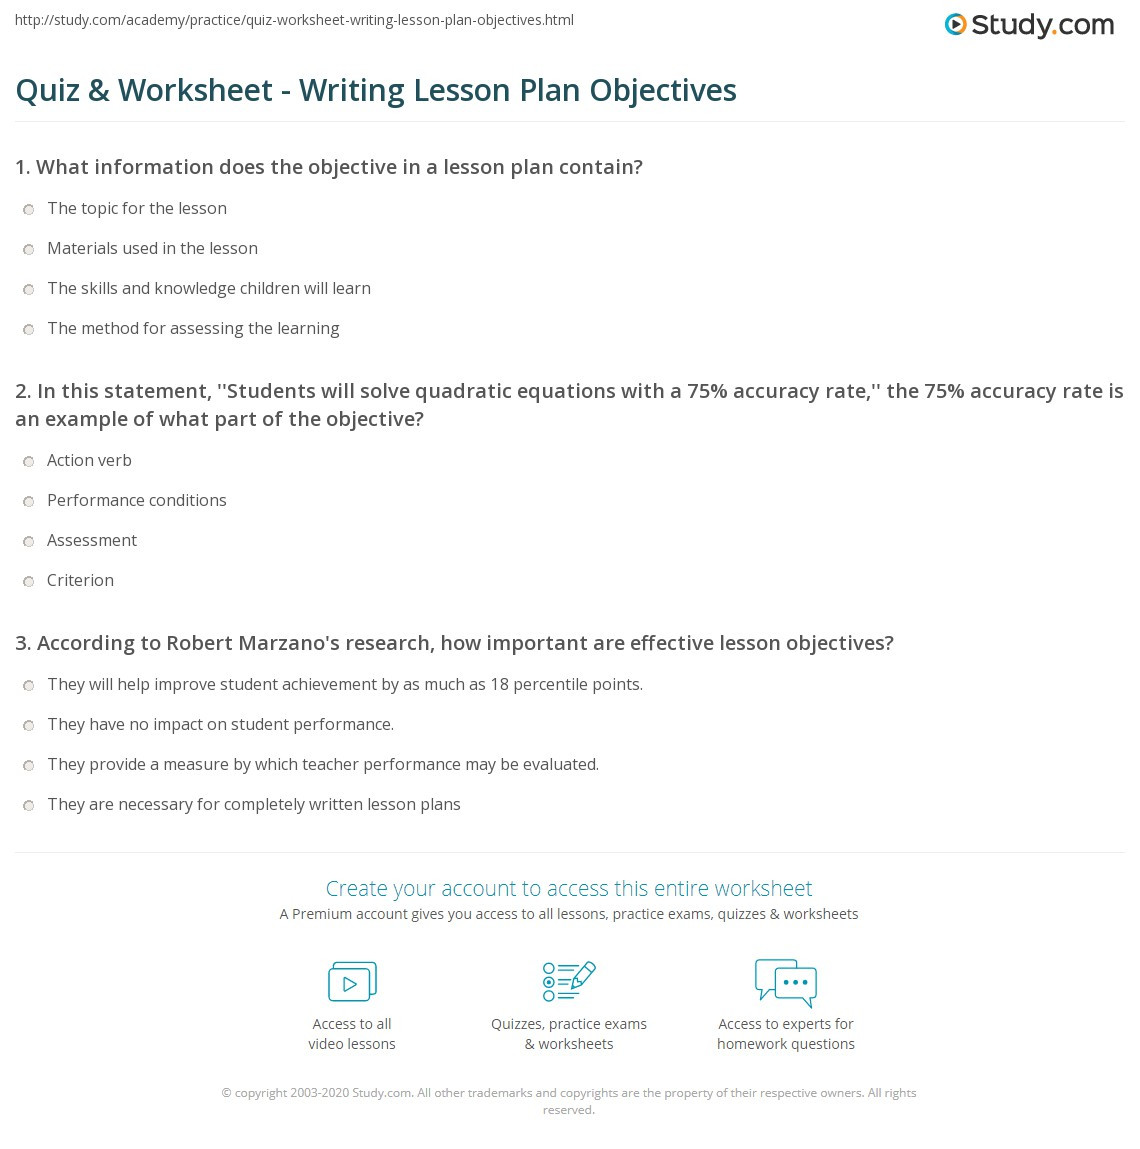 Lesson Plan Objectives Examples Quiz &amp; Worksheet Writing Lesson Plan Objectives